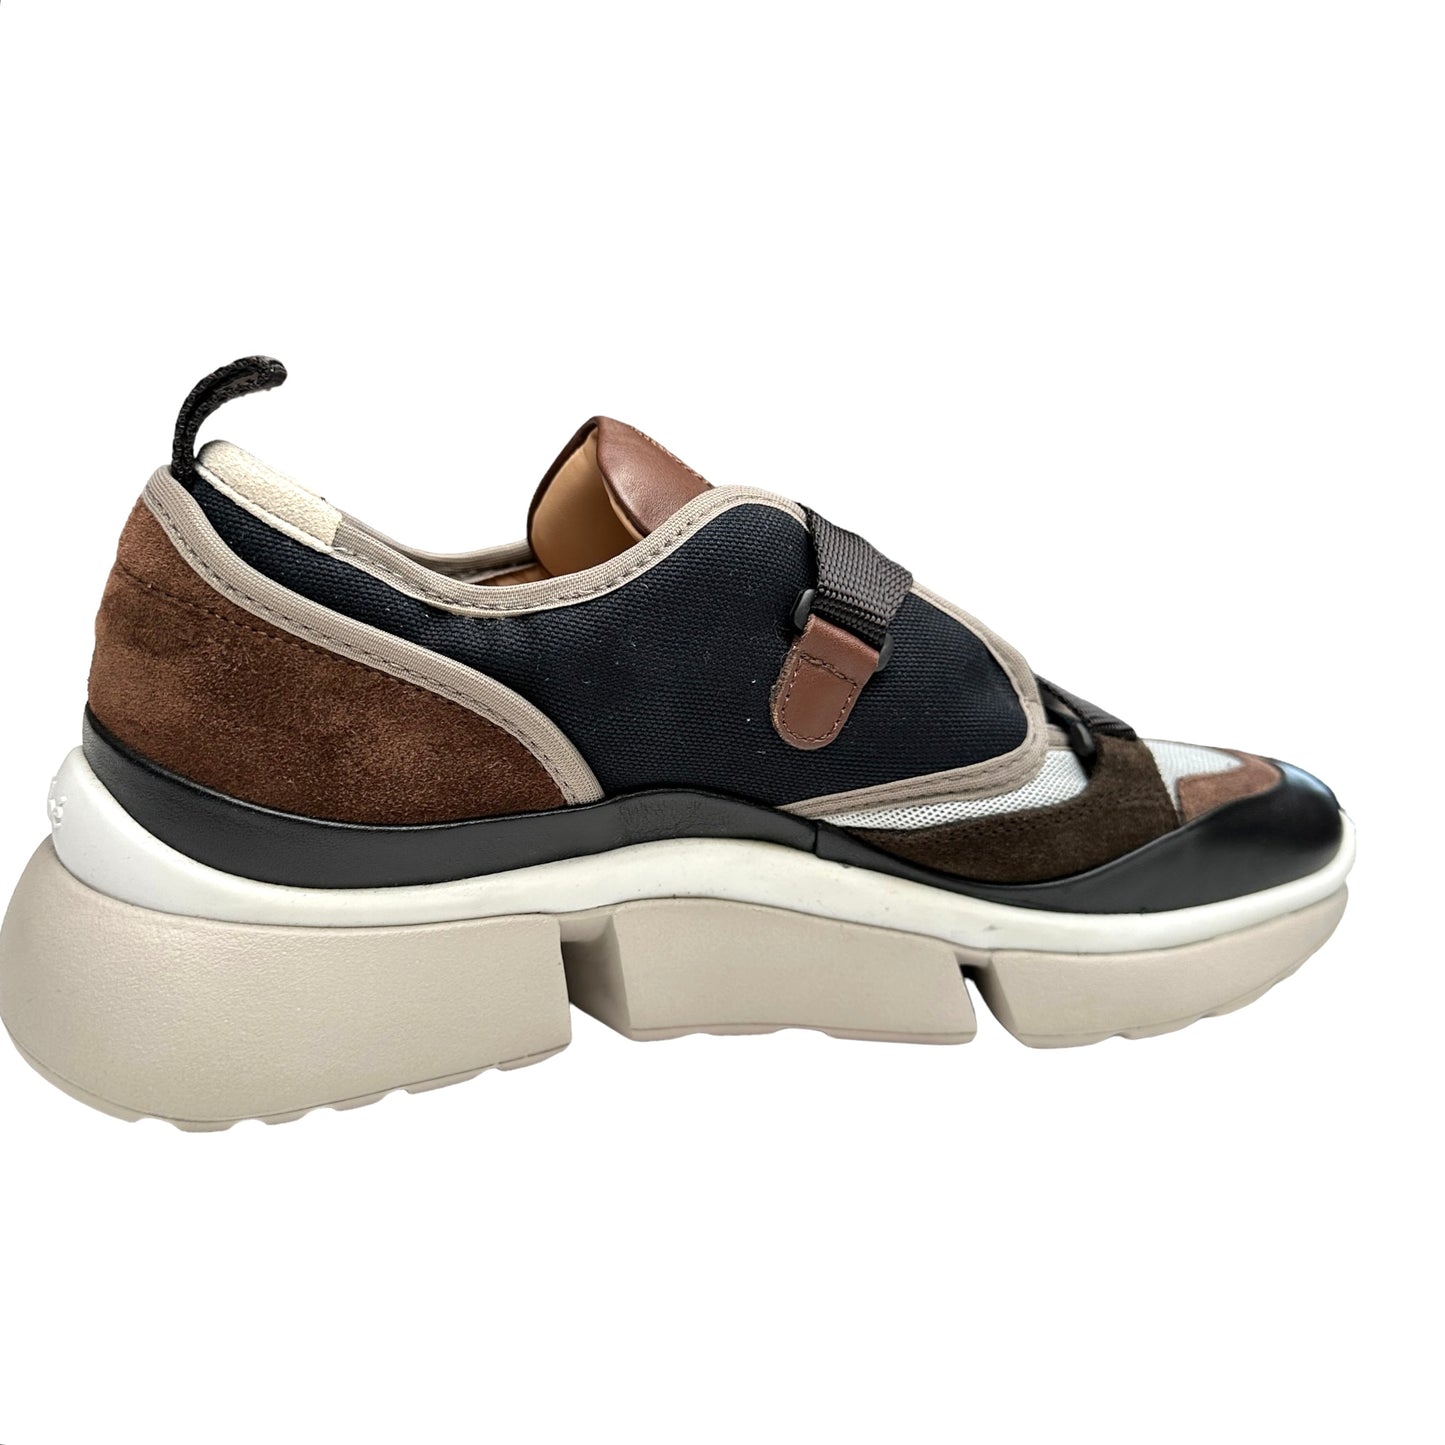 Chunky Suede and Leather Sneakers - 10